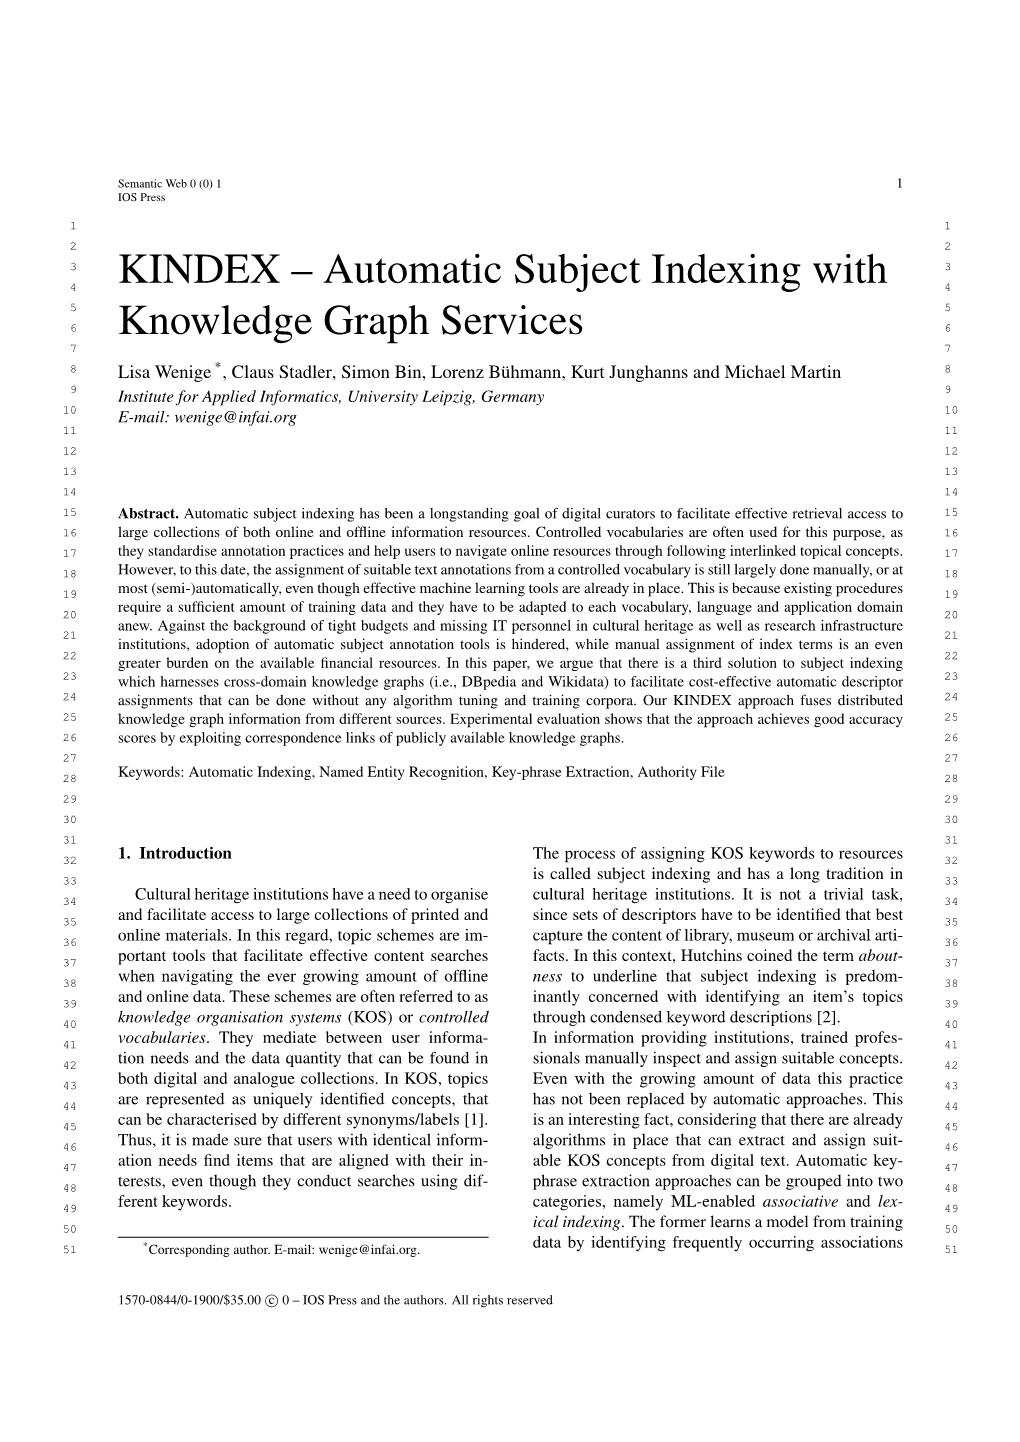 KINDEX – Automatic Subject Indexing with Knowledge Graph Services